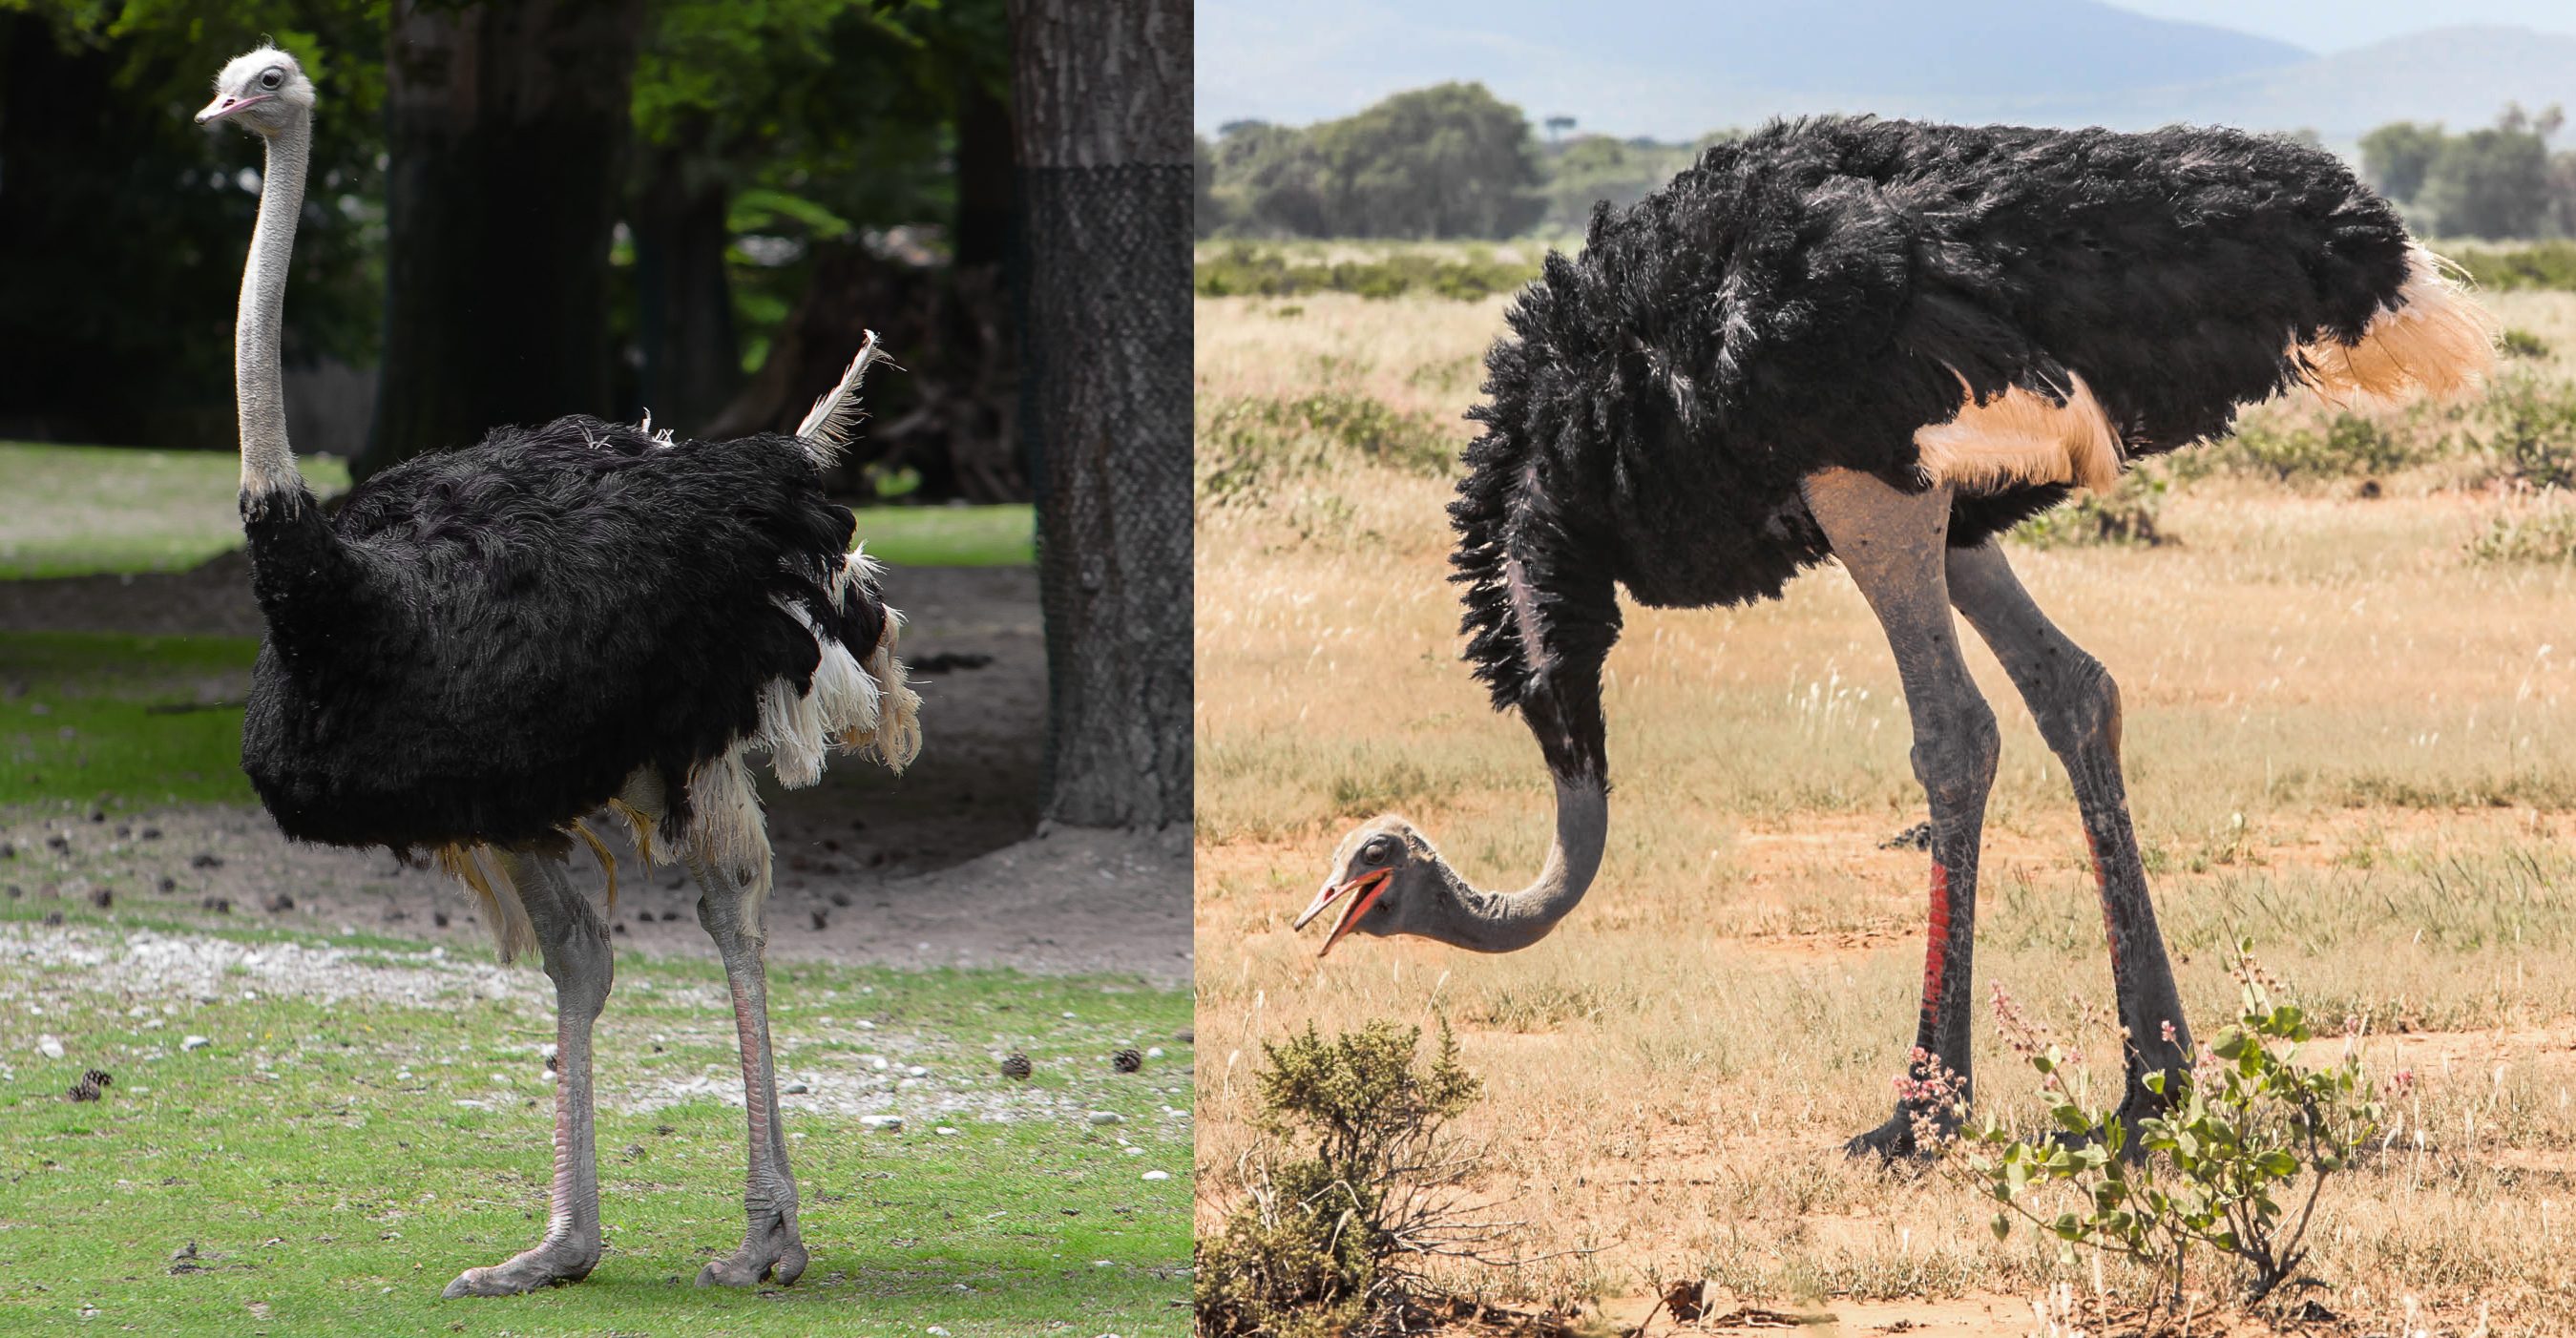 What do you know about the ostrich?